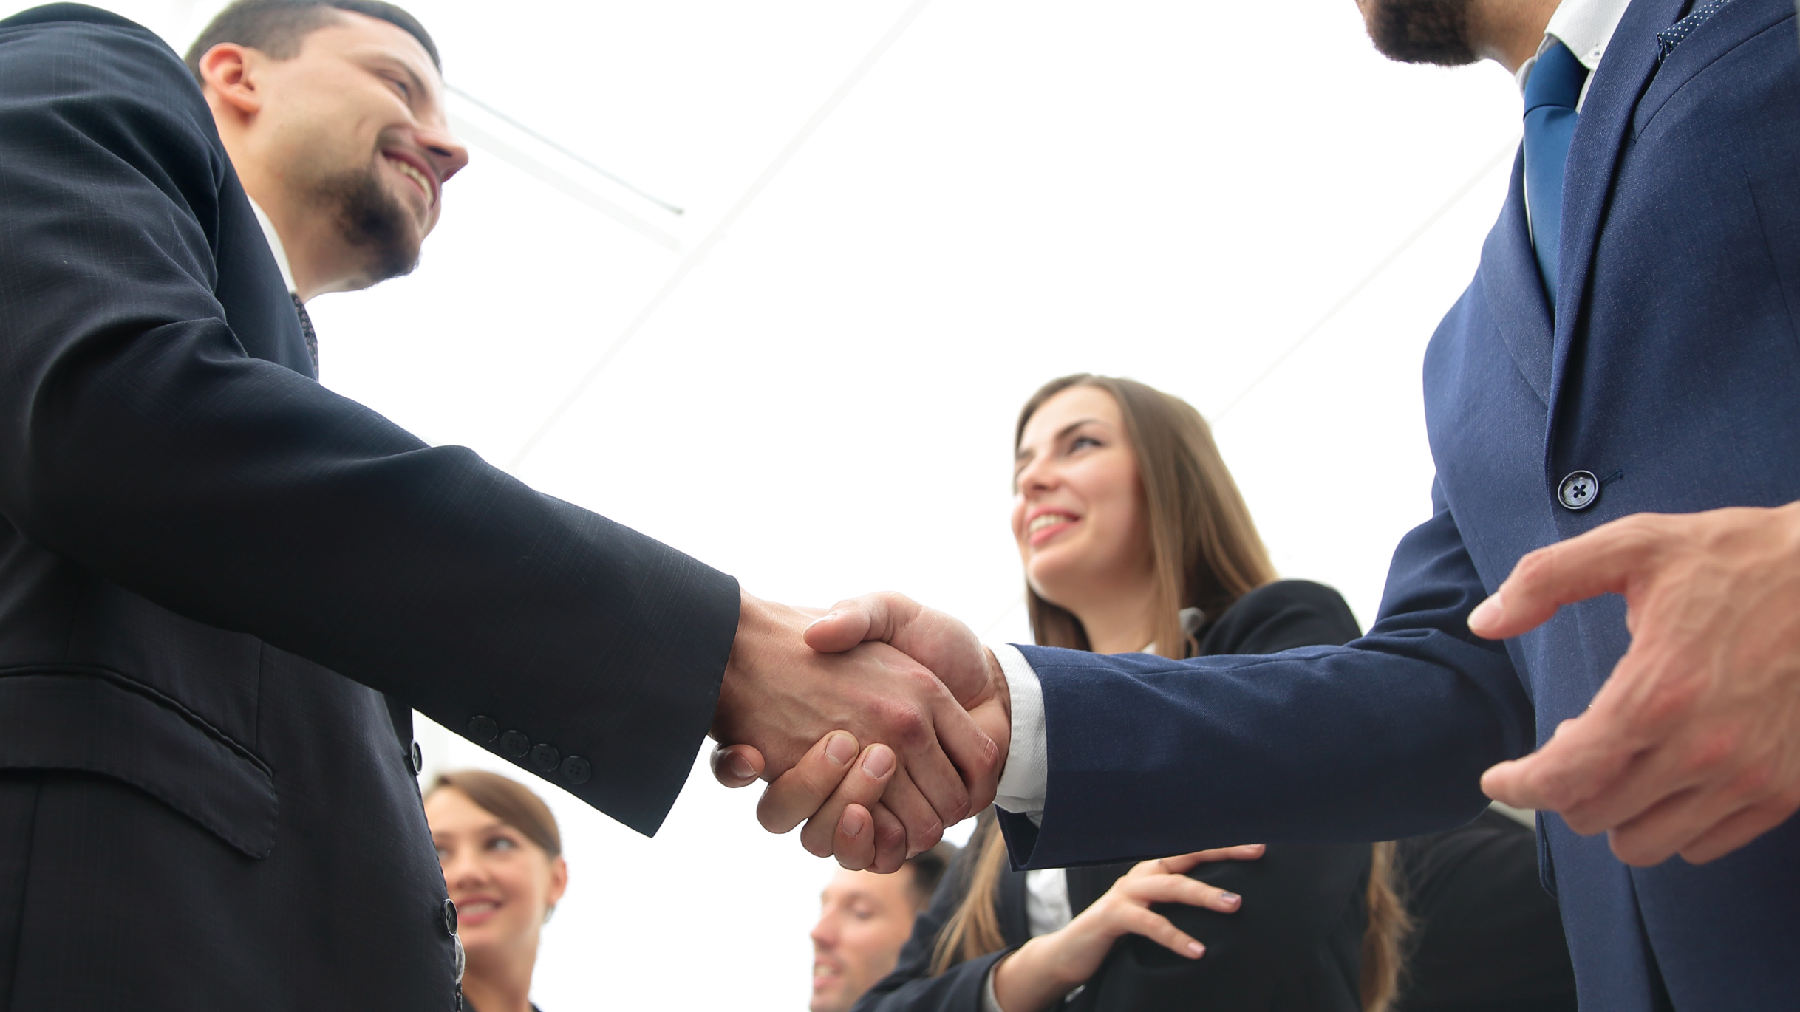 stock image of business people shaking hands